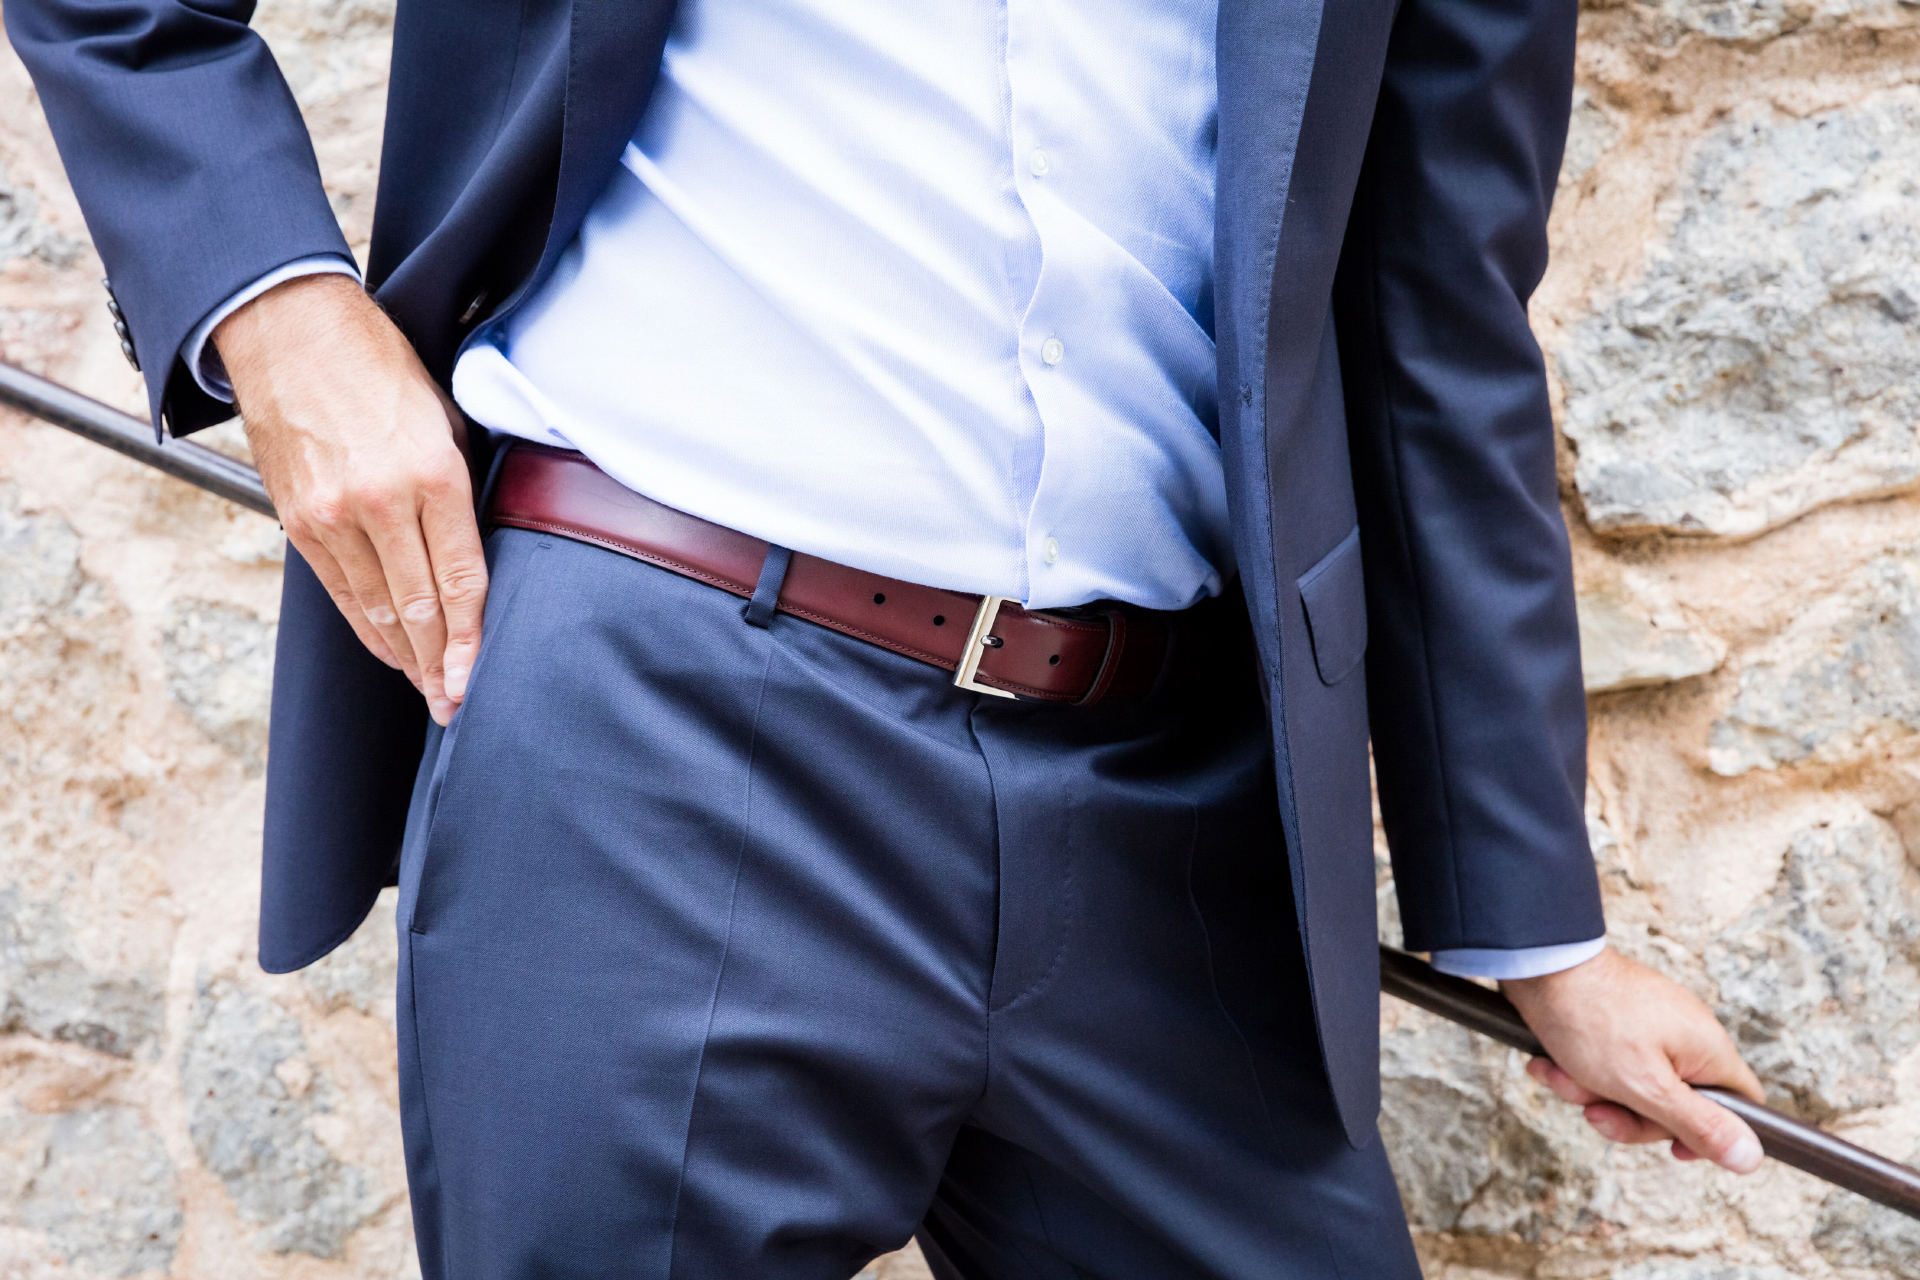 wearing burgundy belt with a navy blue suit